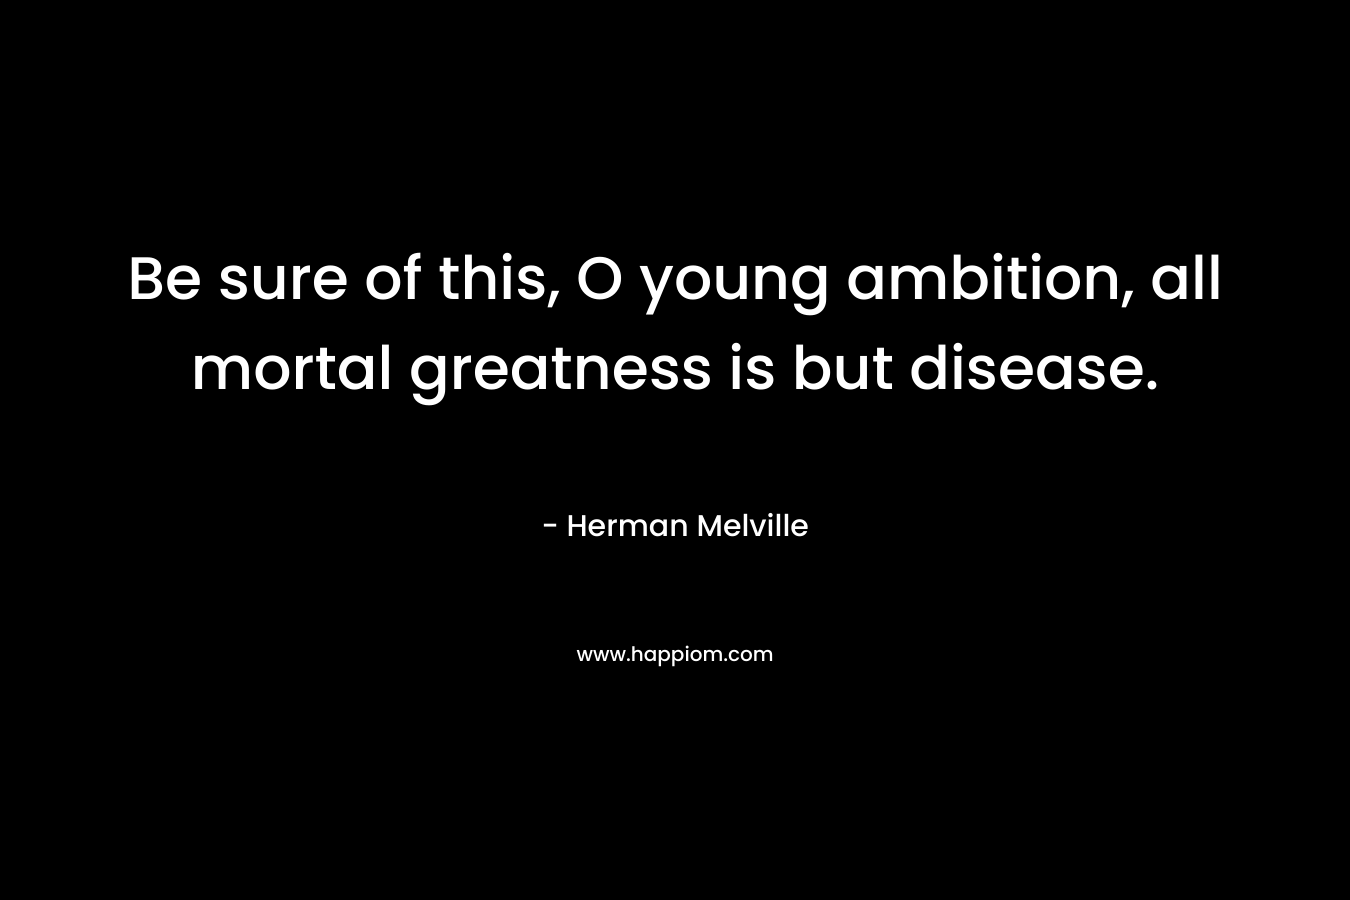 Be sure of this, O young ambition, all mortal greatness is but disease.